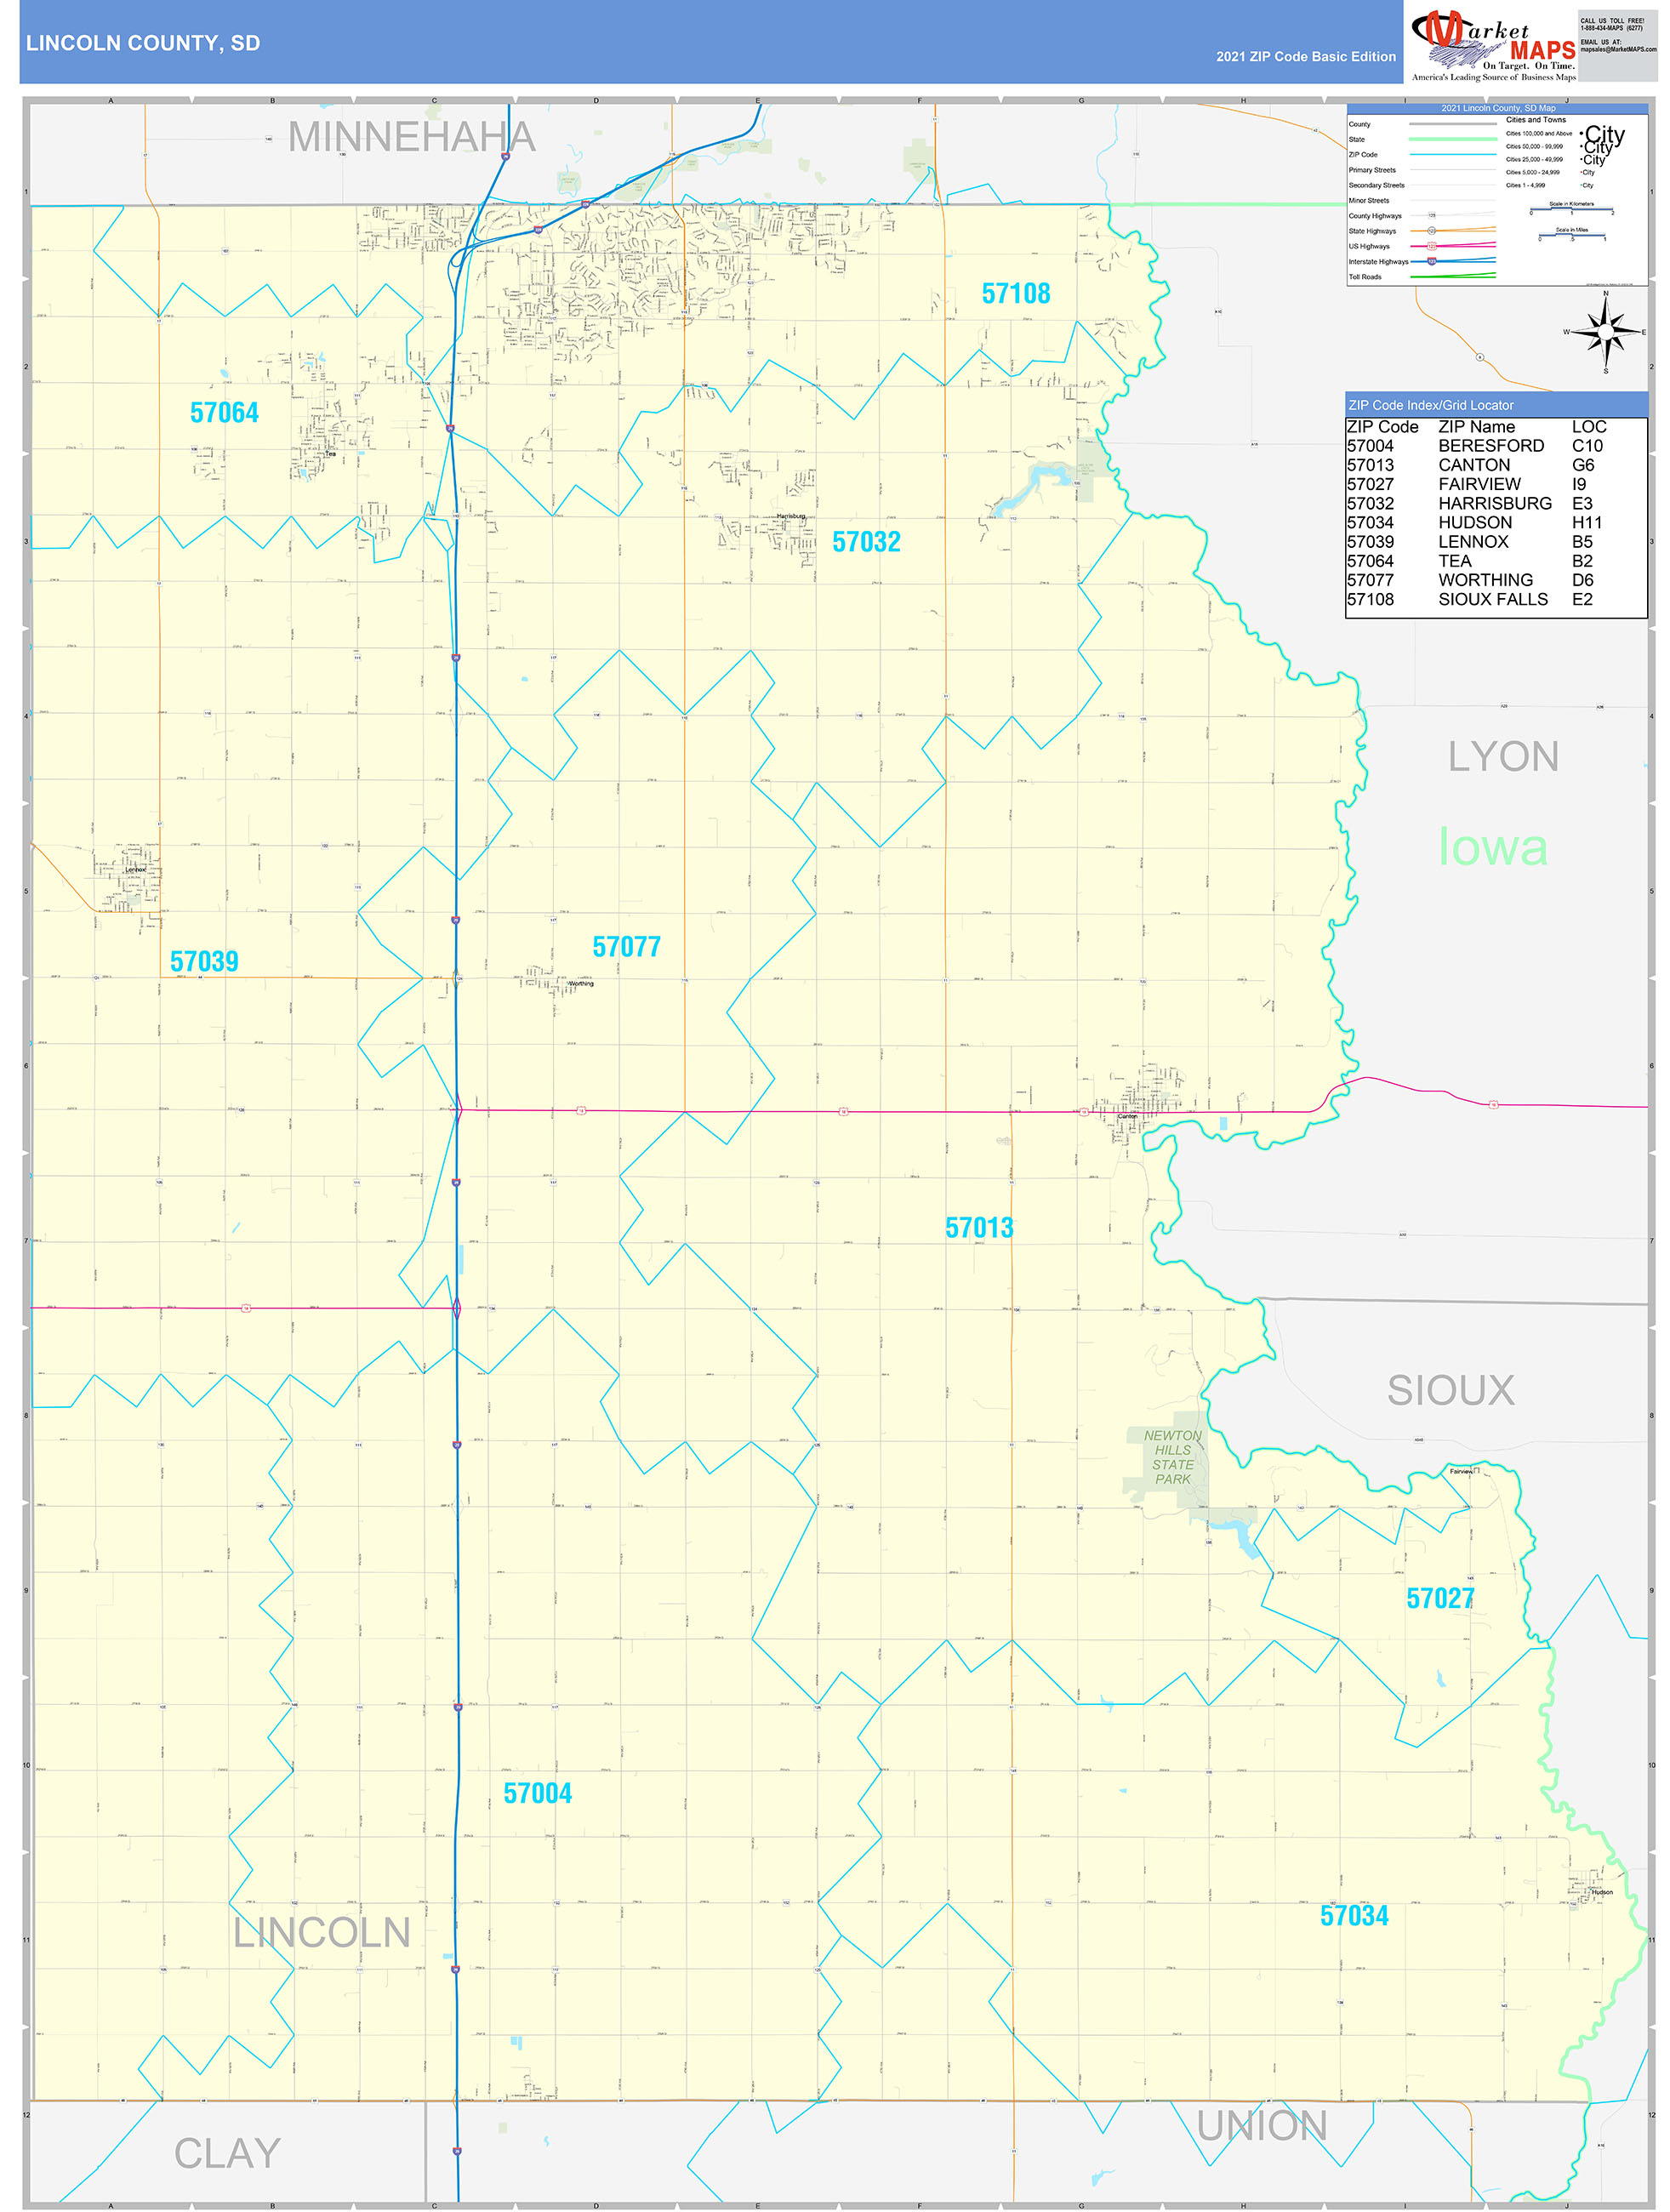 Lincoln County, SD Zip Code Wall Map Basic Style by MarketMAPS